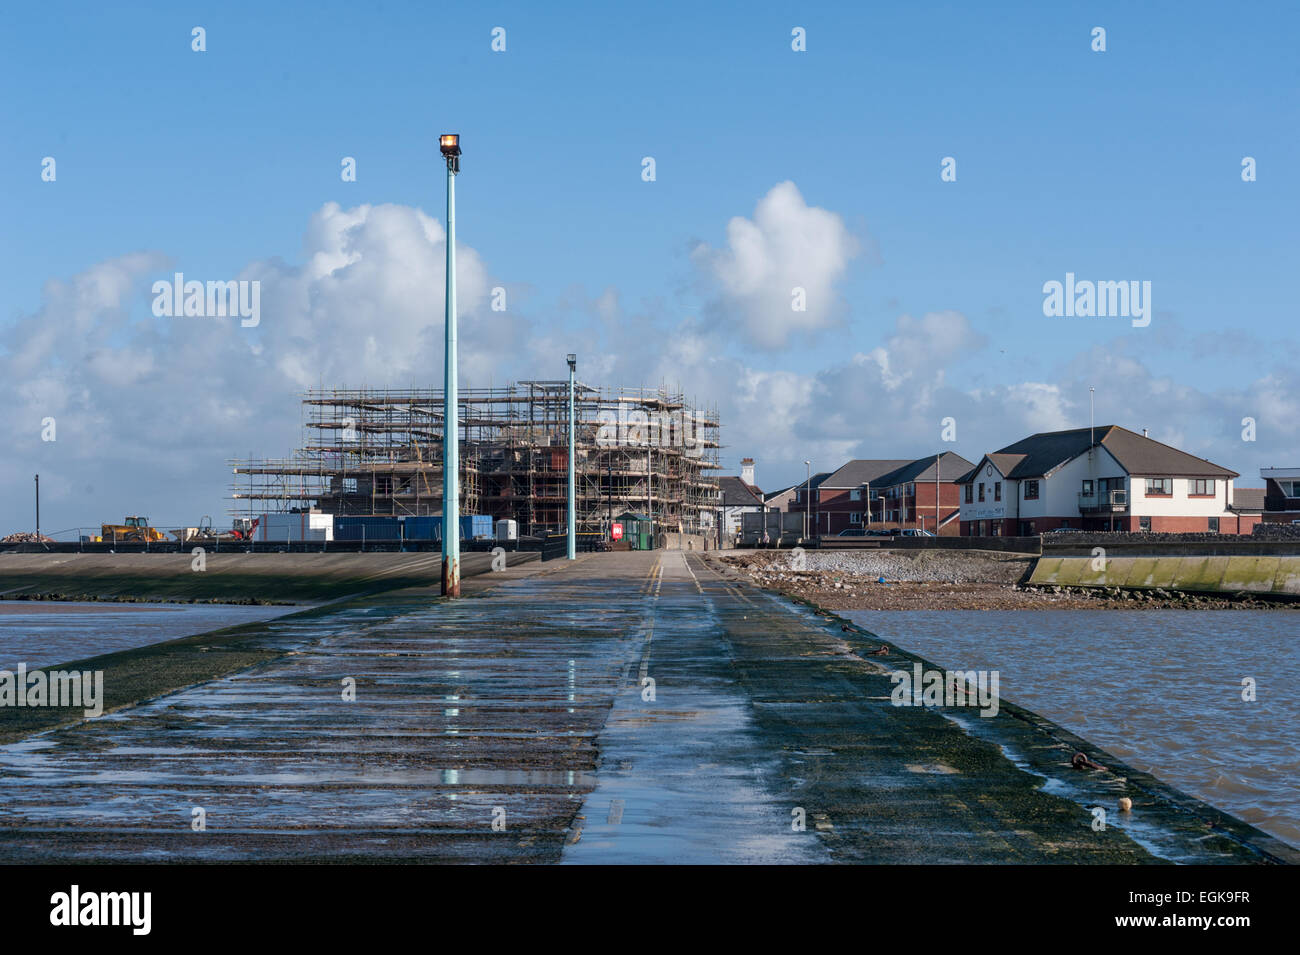 Construction site seen from Ferry slipway Stock Photo